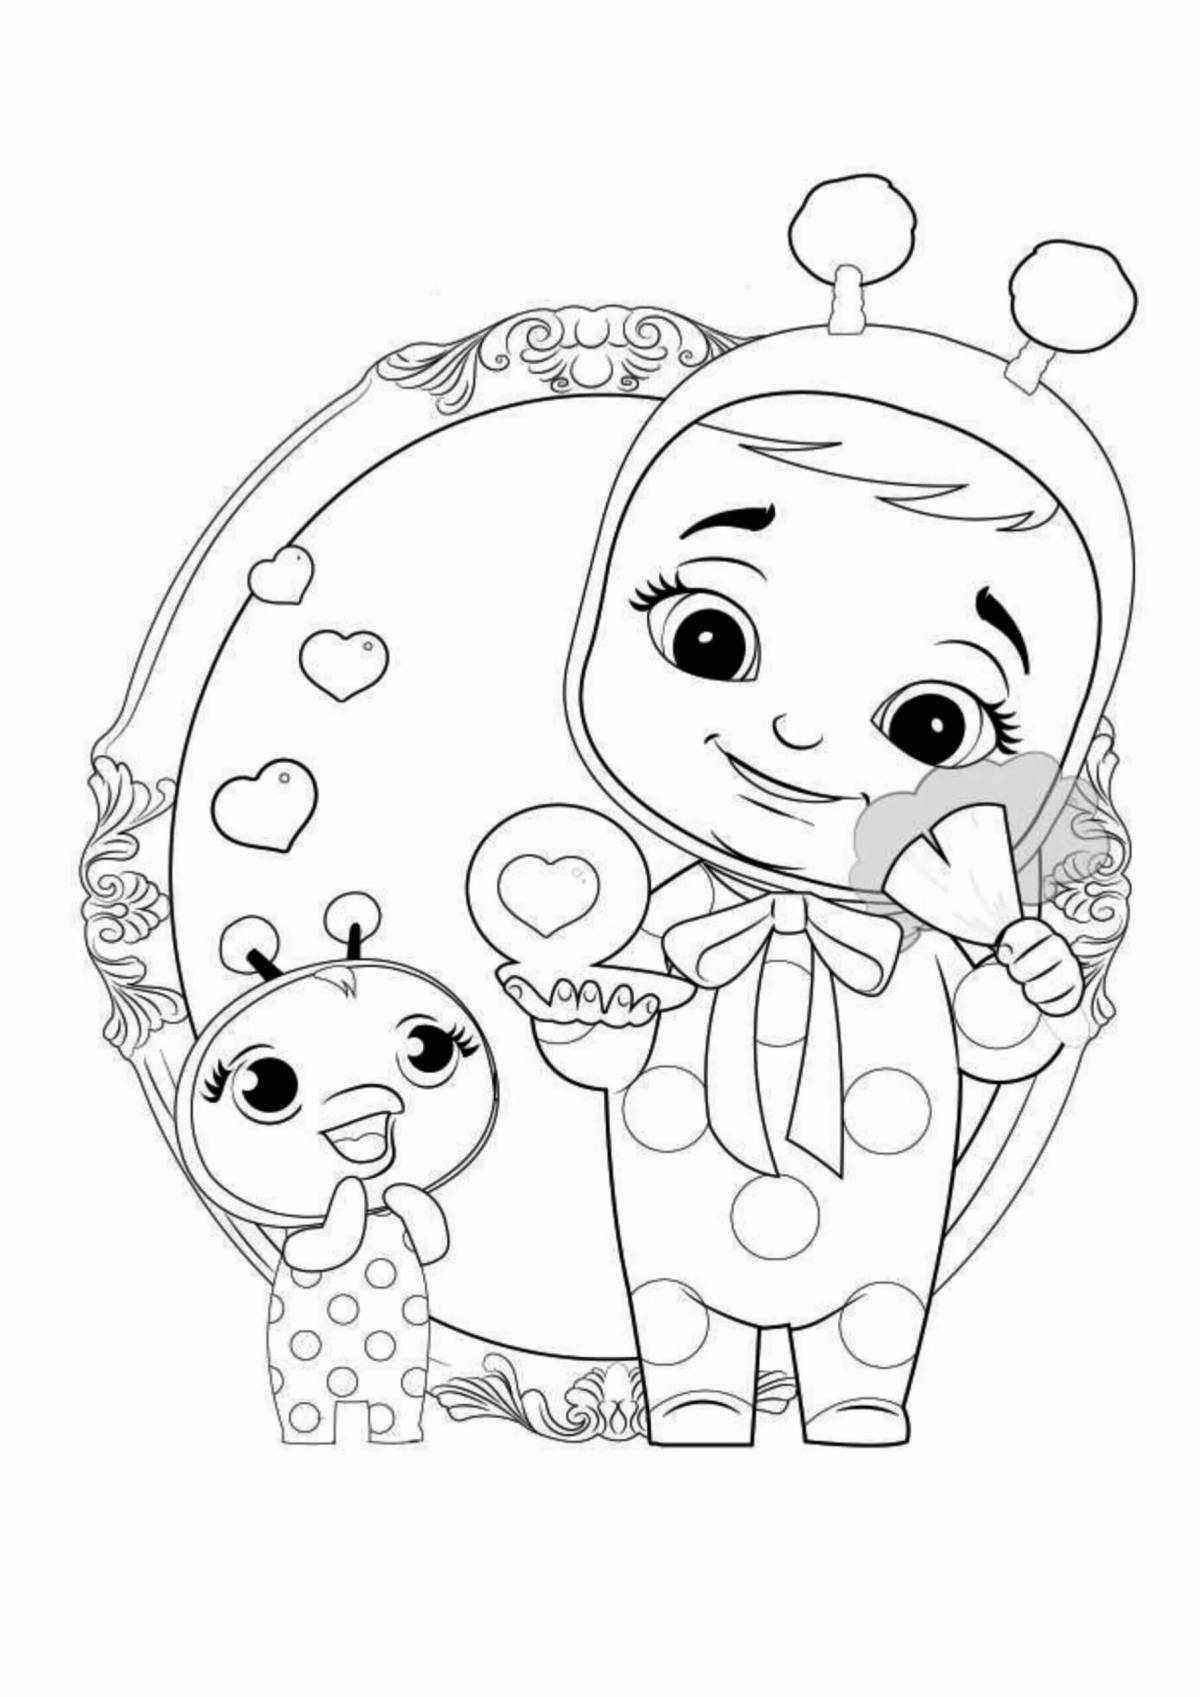 Fancy baby's edge coloring book for kids